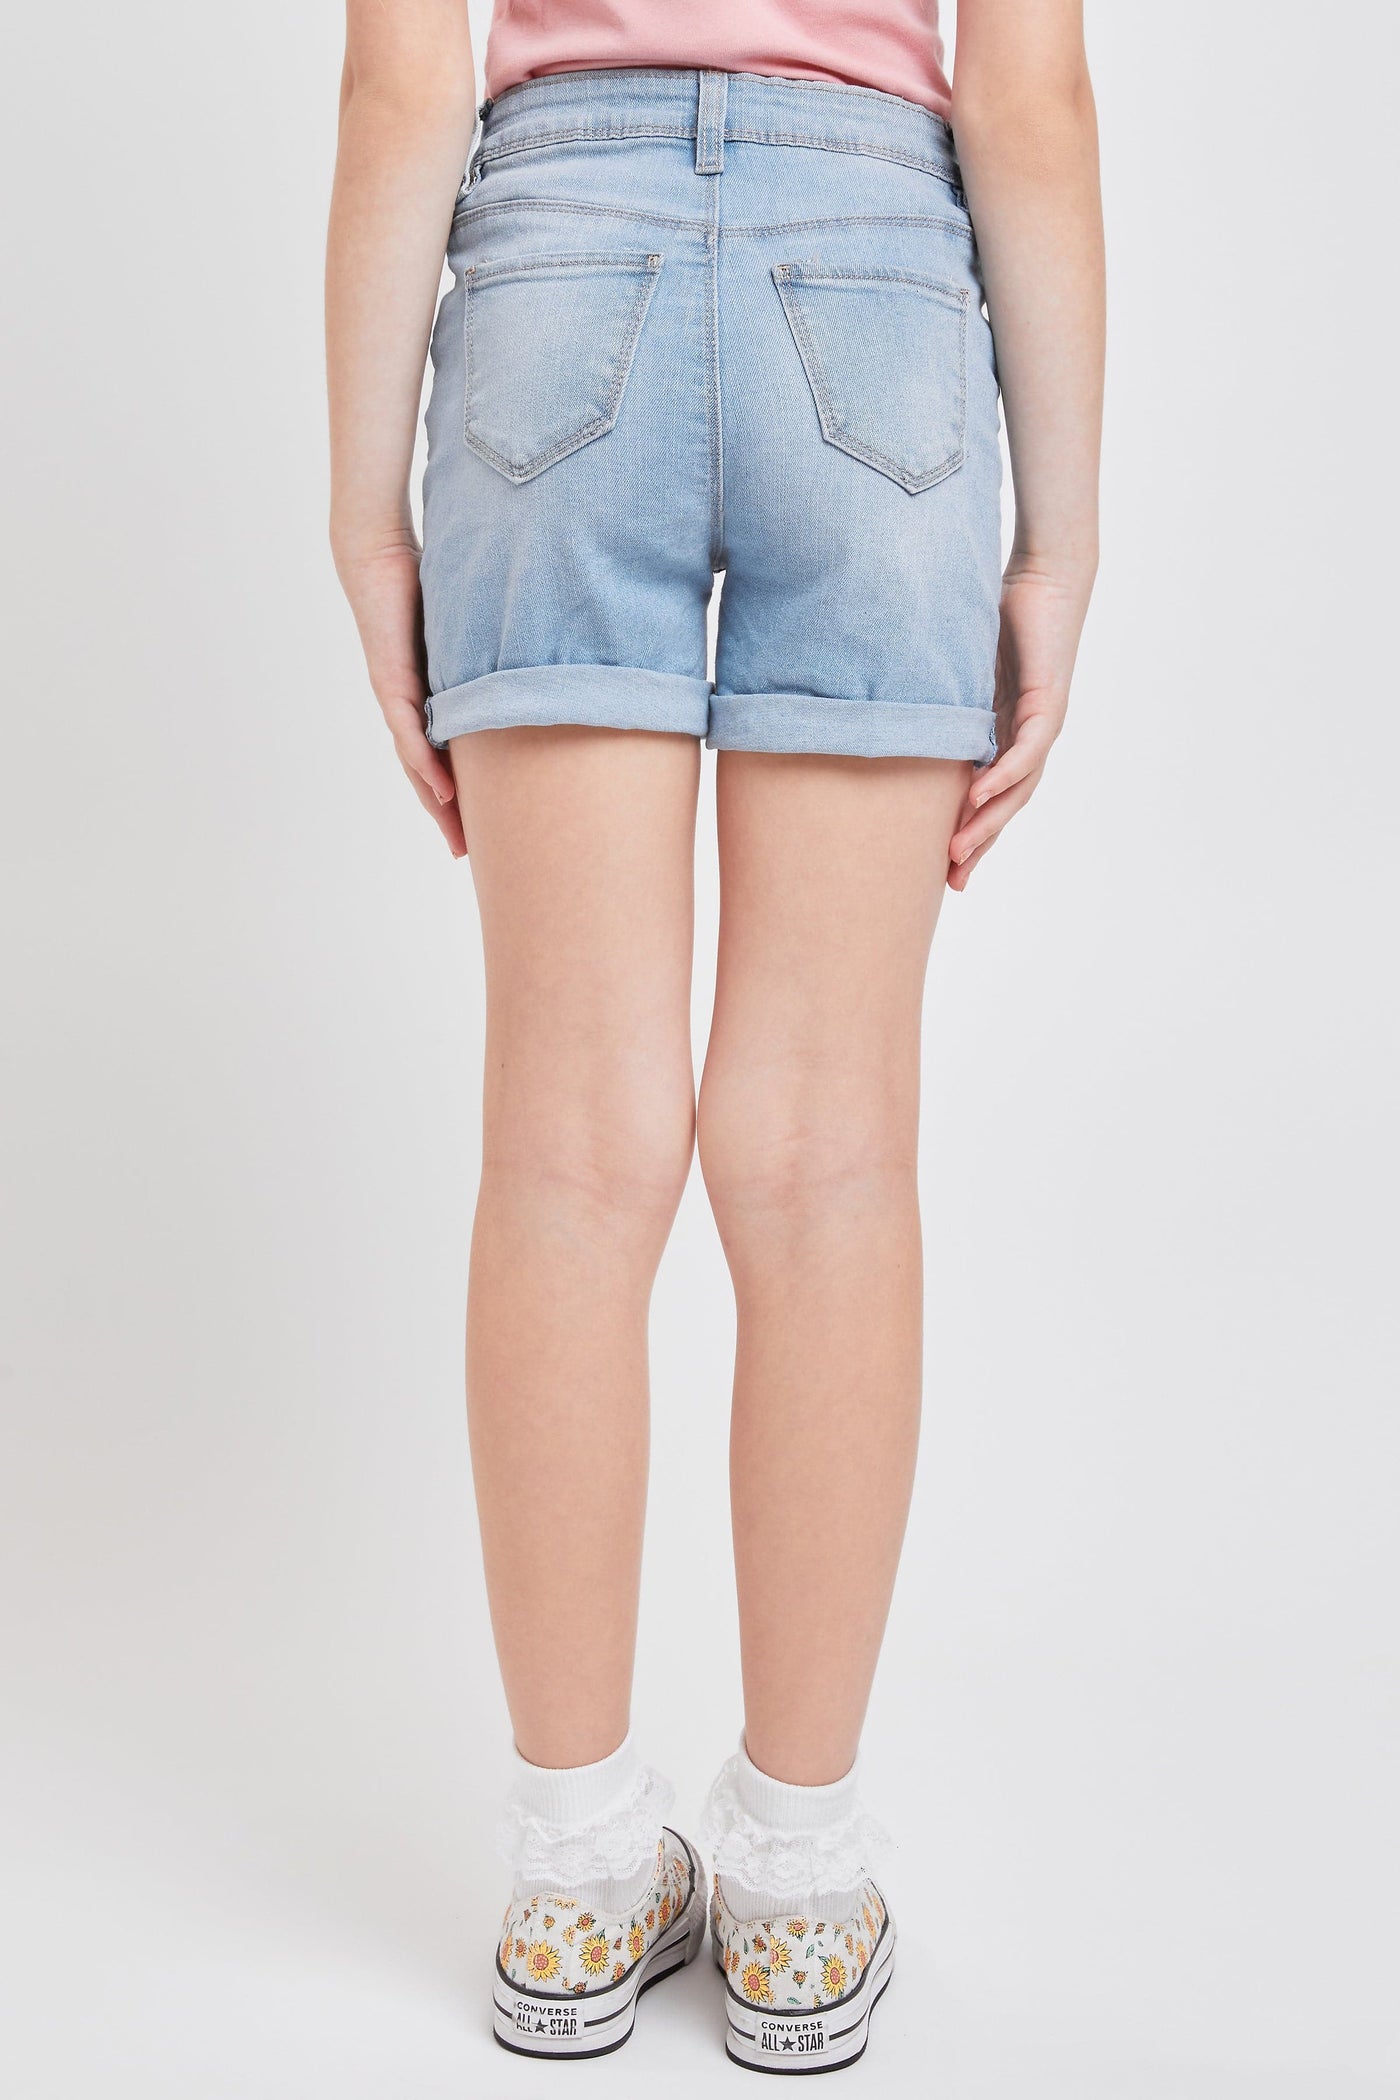 Girls Exposed Button Basic High Rise Rip And Self Repair Cuffed Shorts